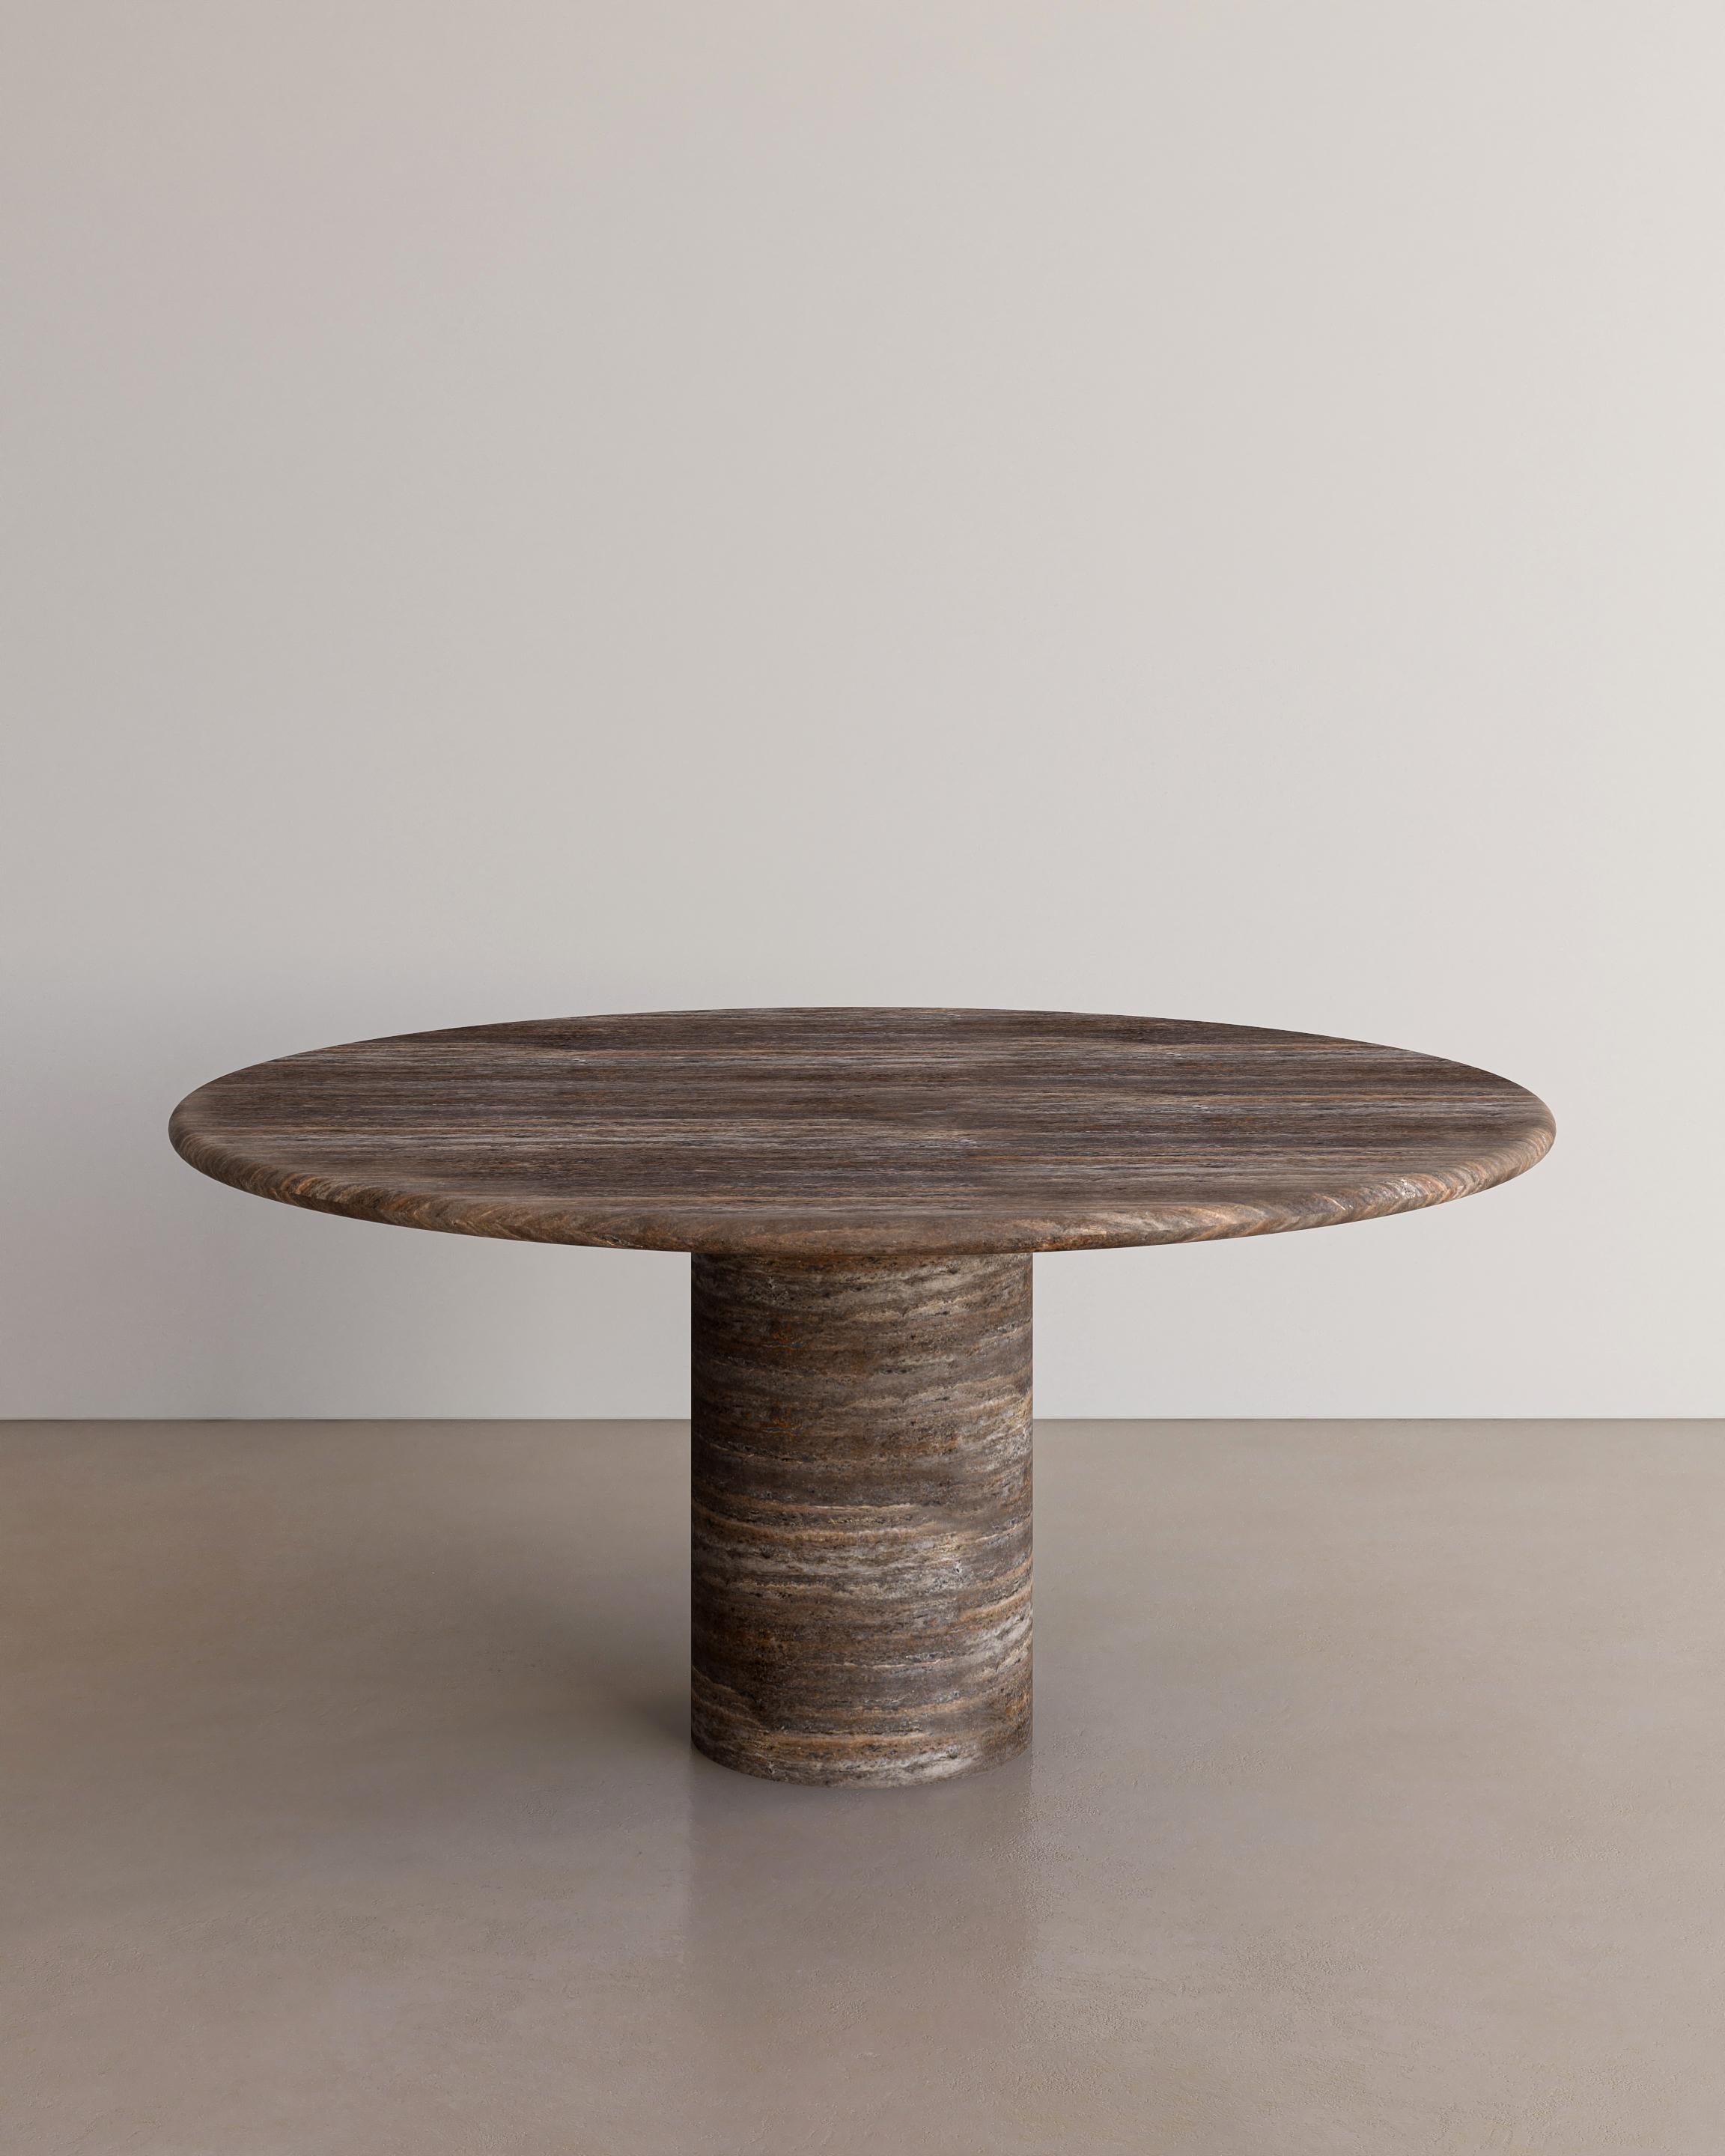 The Voyage Dining Table I in Cacao Travertine with a honed finish by The Essentialist celebrates the simple pleasures that define life and replenish the soul through harnessing essential form. Envisioned as an ode to historical elegance, captured